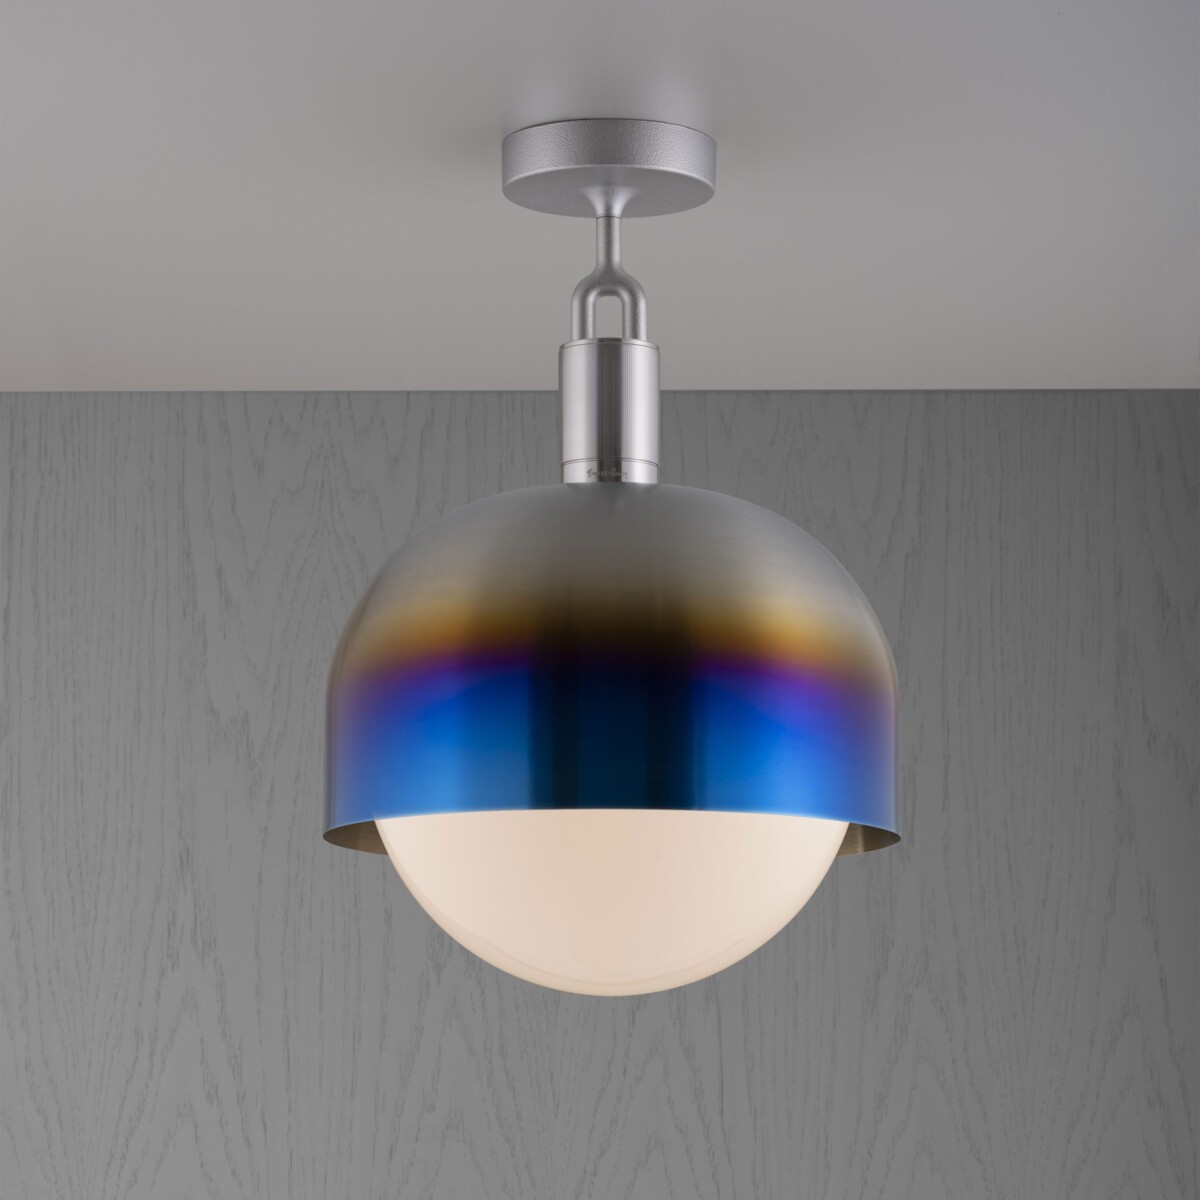 Forked_lighting_Ceiling_Burnt_Metal_Large_Shade_Opal_Globe_Web-scaled